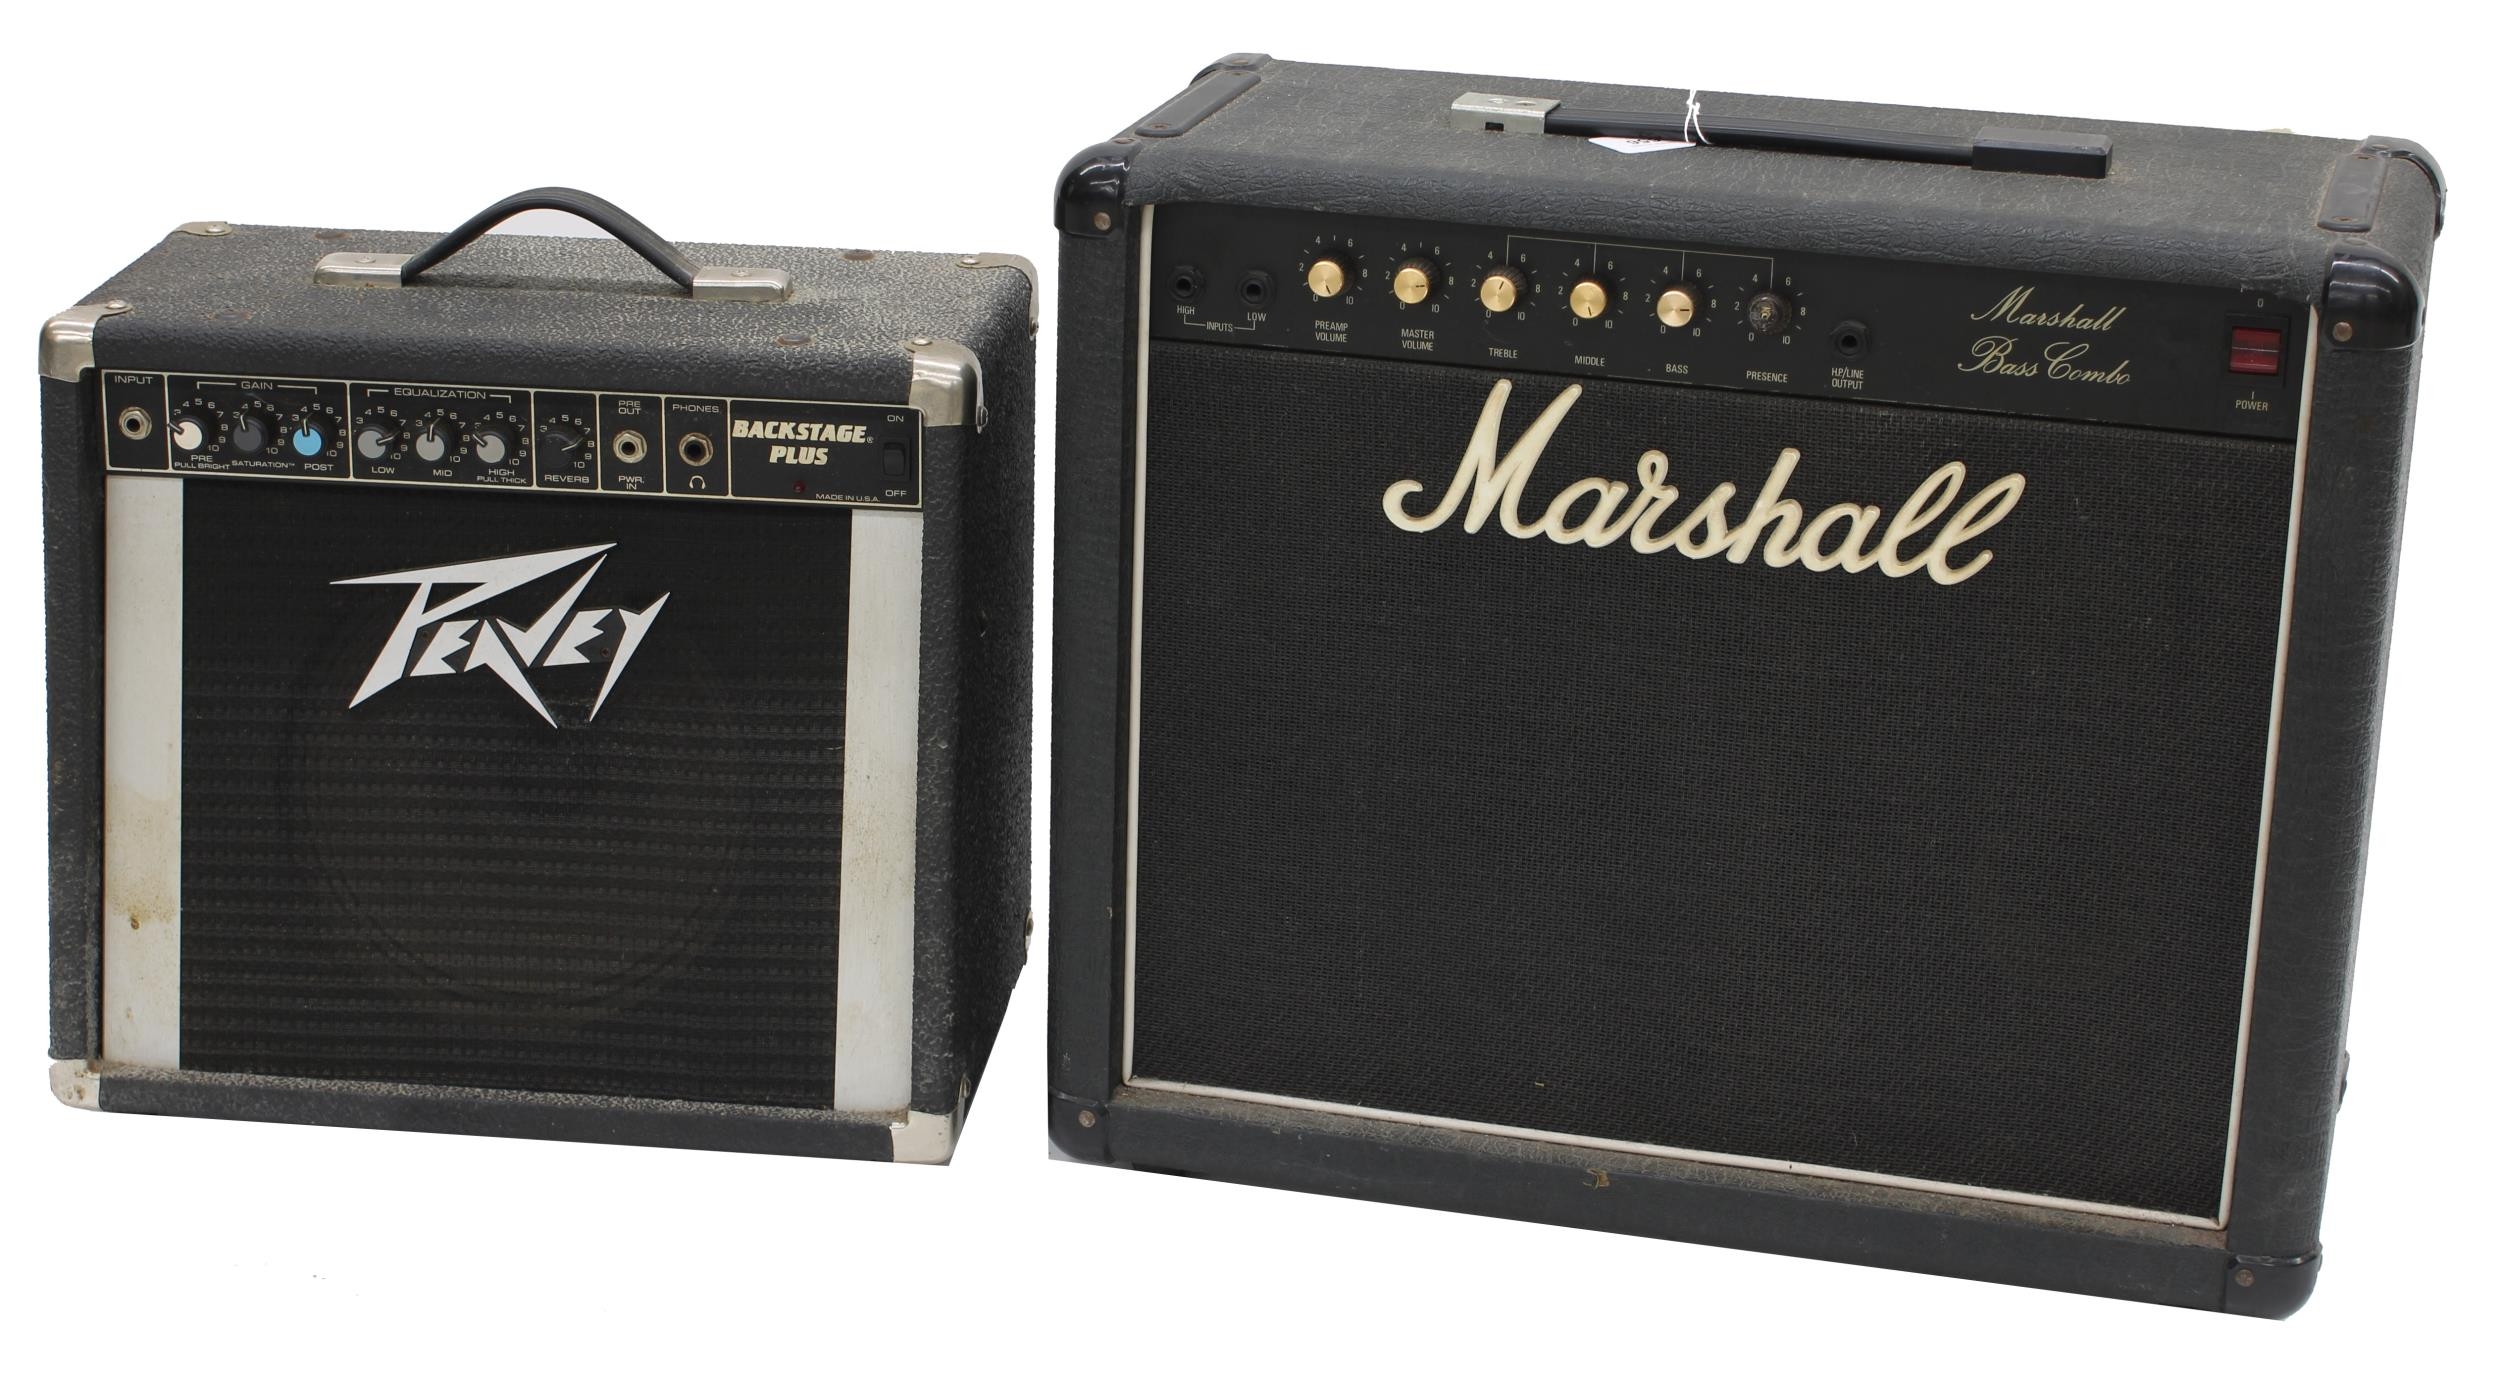 1990 Marshall Bass Combo guitar amplifier; together with a Peavey Backstage Plus guitar amplifier (